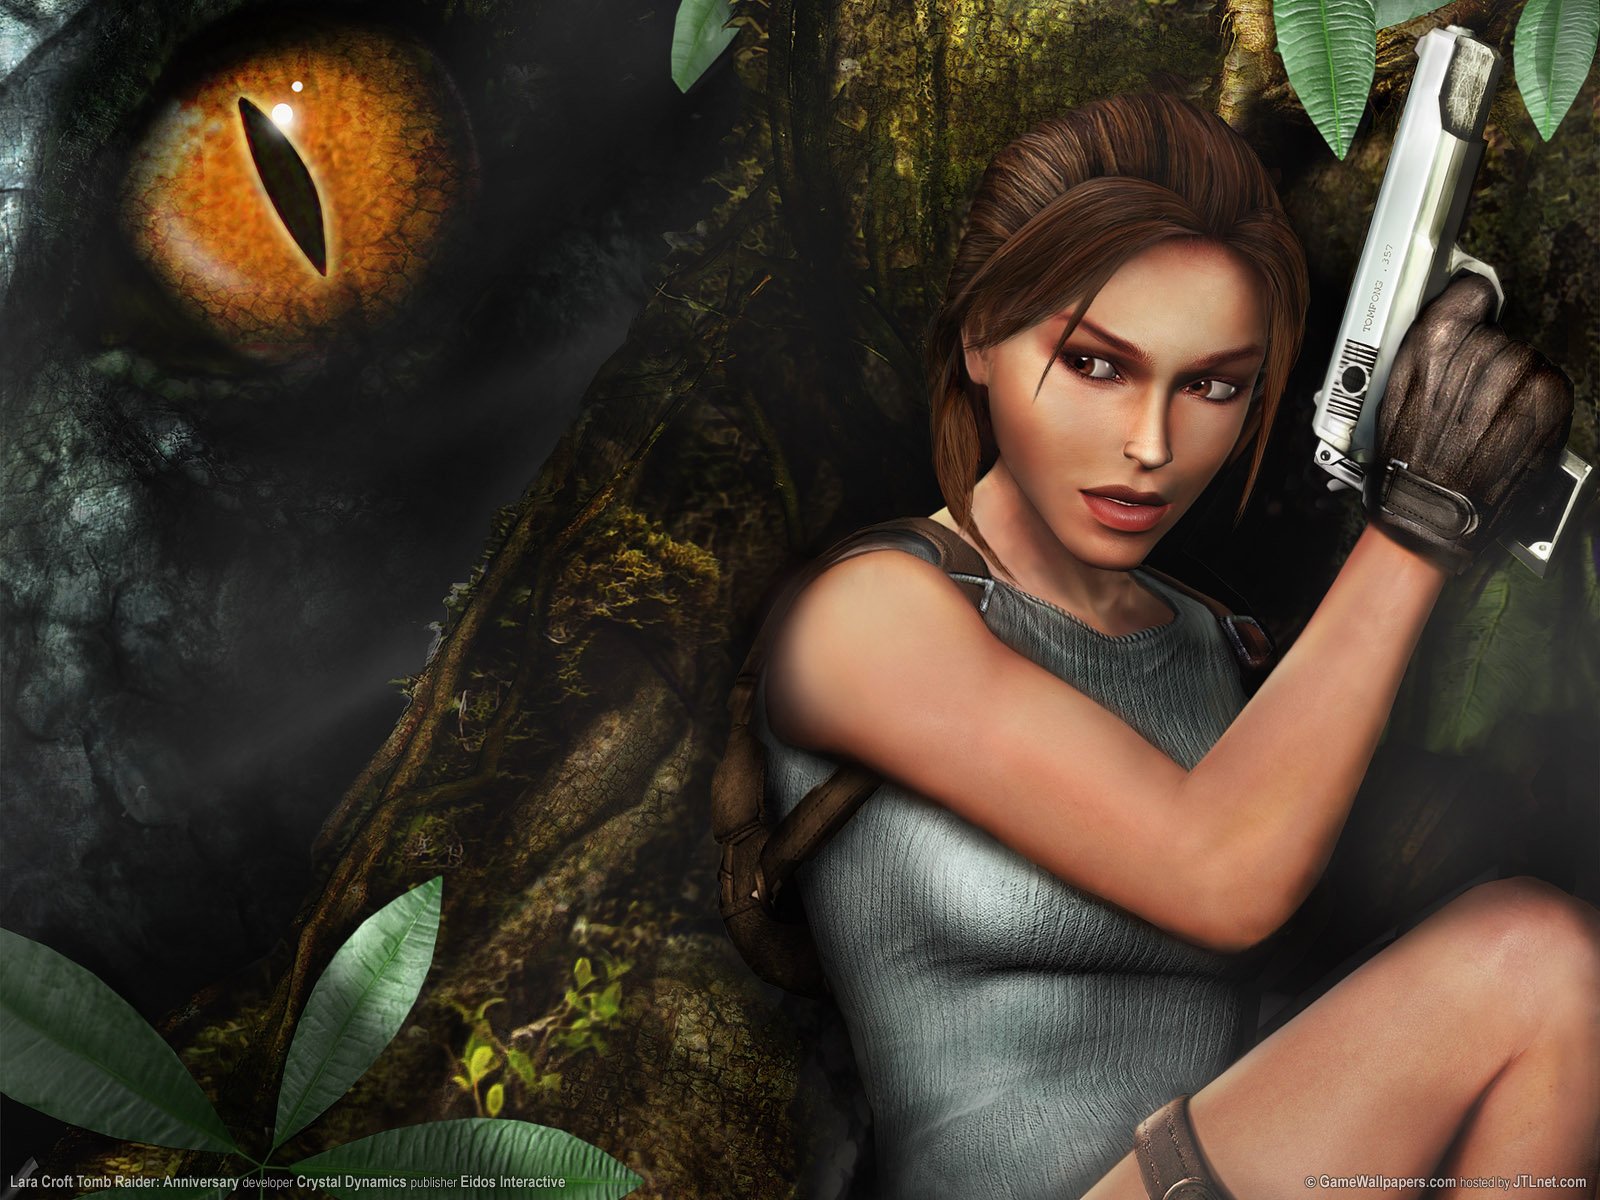 How Well Do You Know Tomb Raider? - Quiz